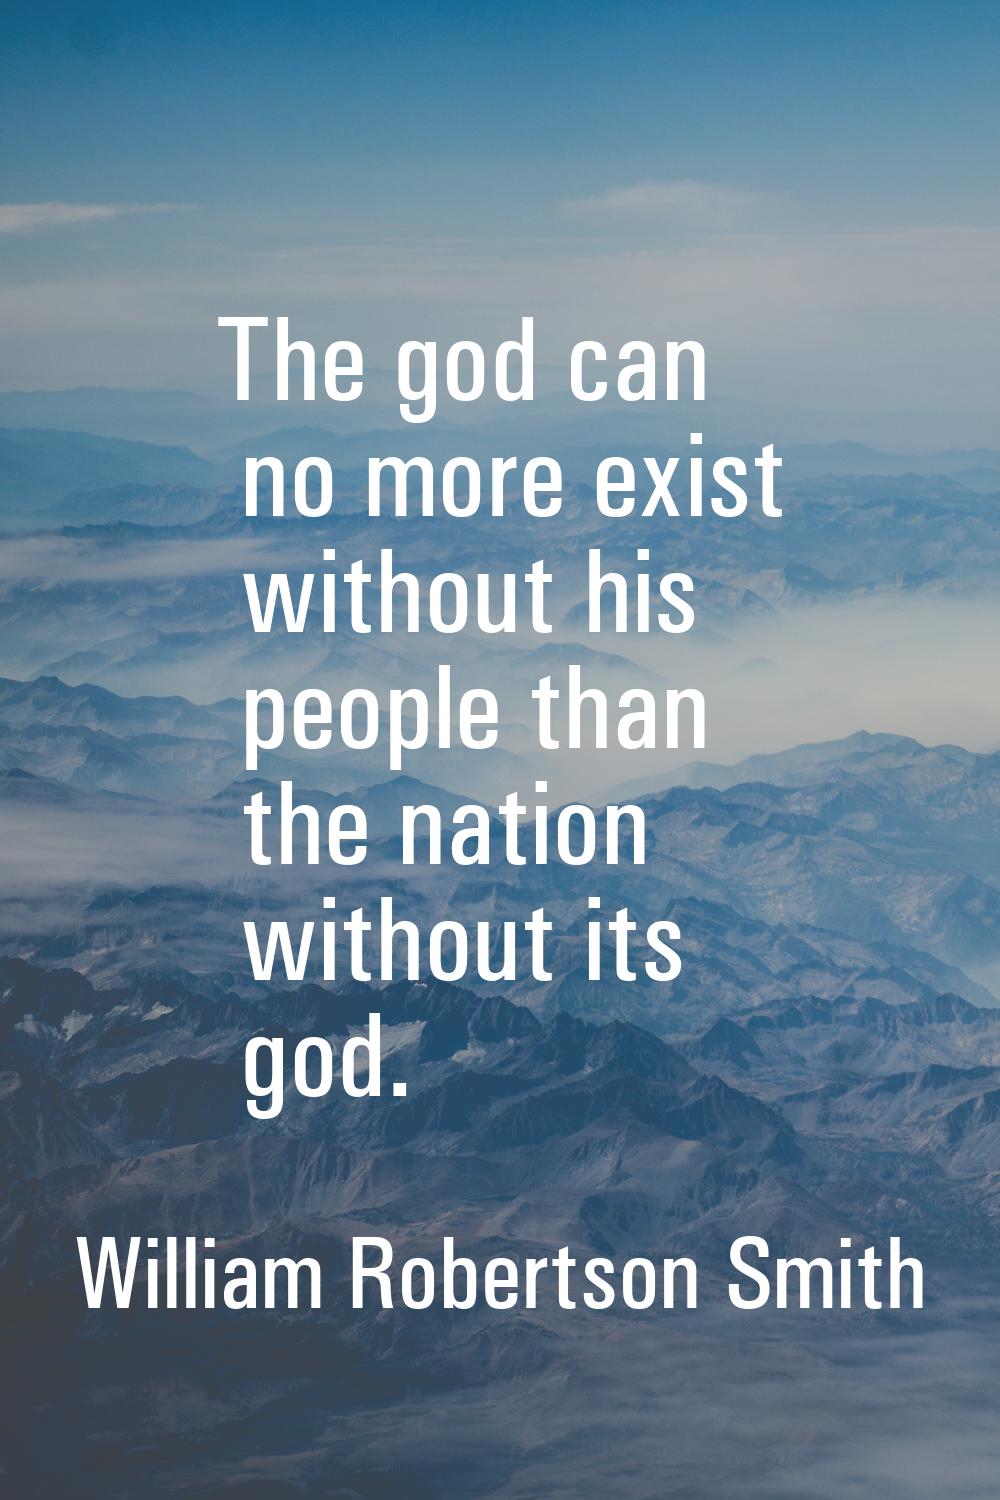 The god can no more exist without his people than the nation without its god.